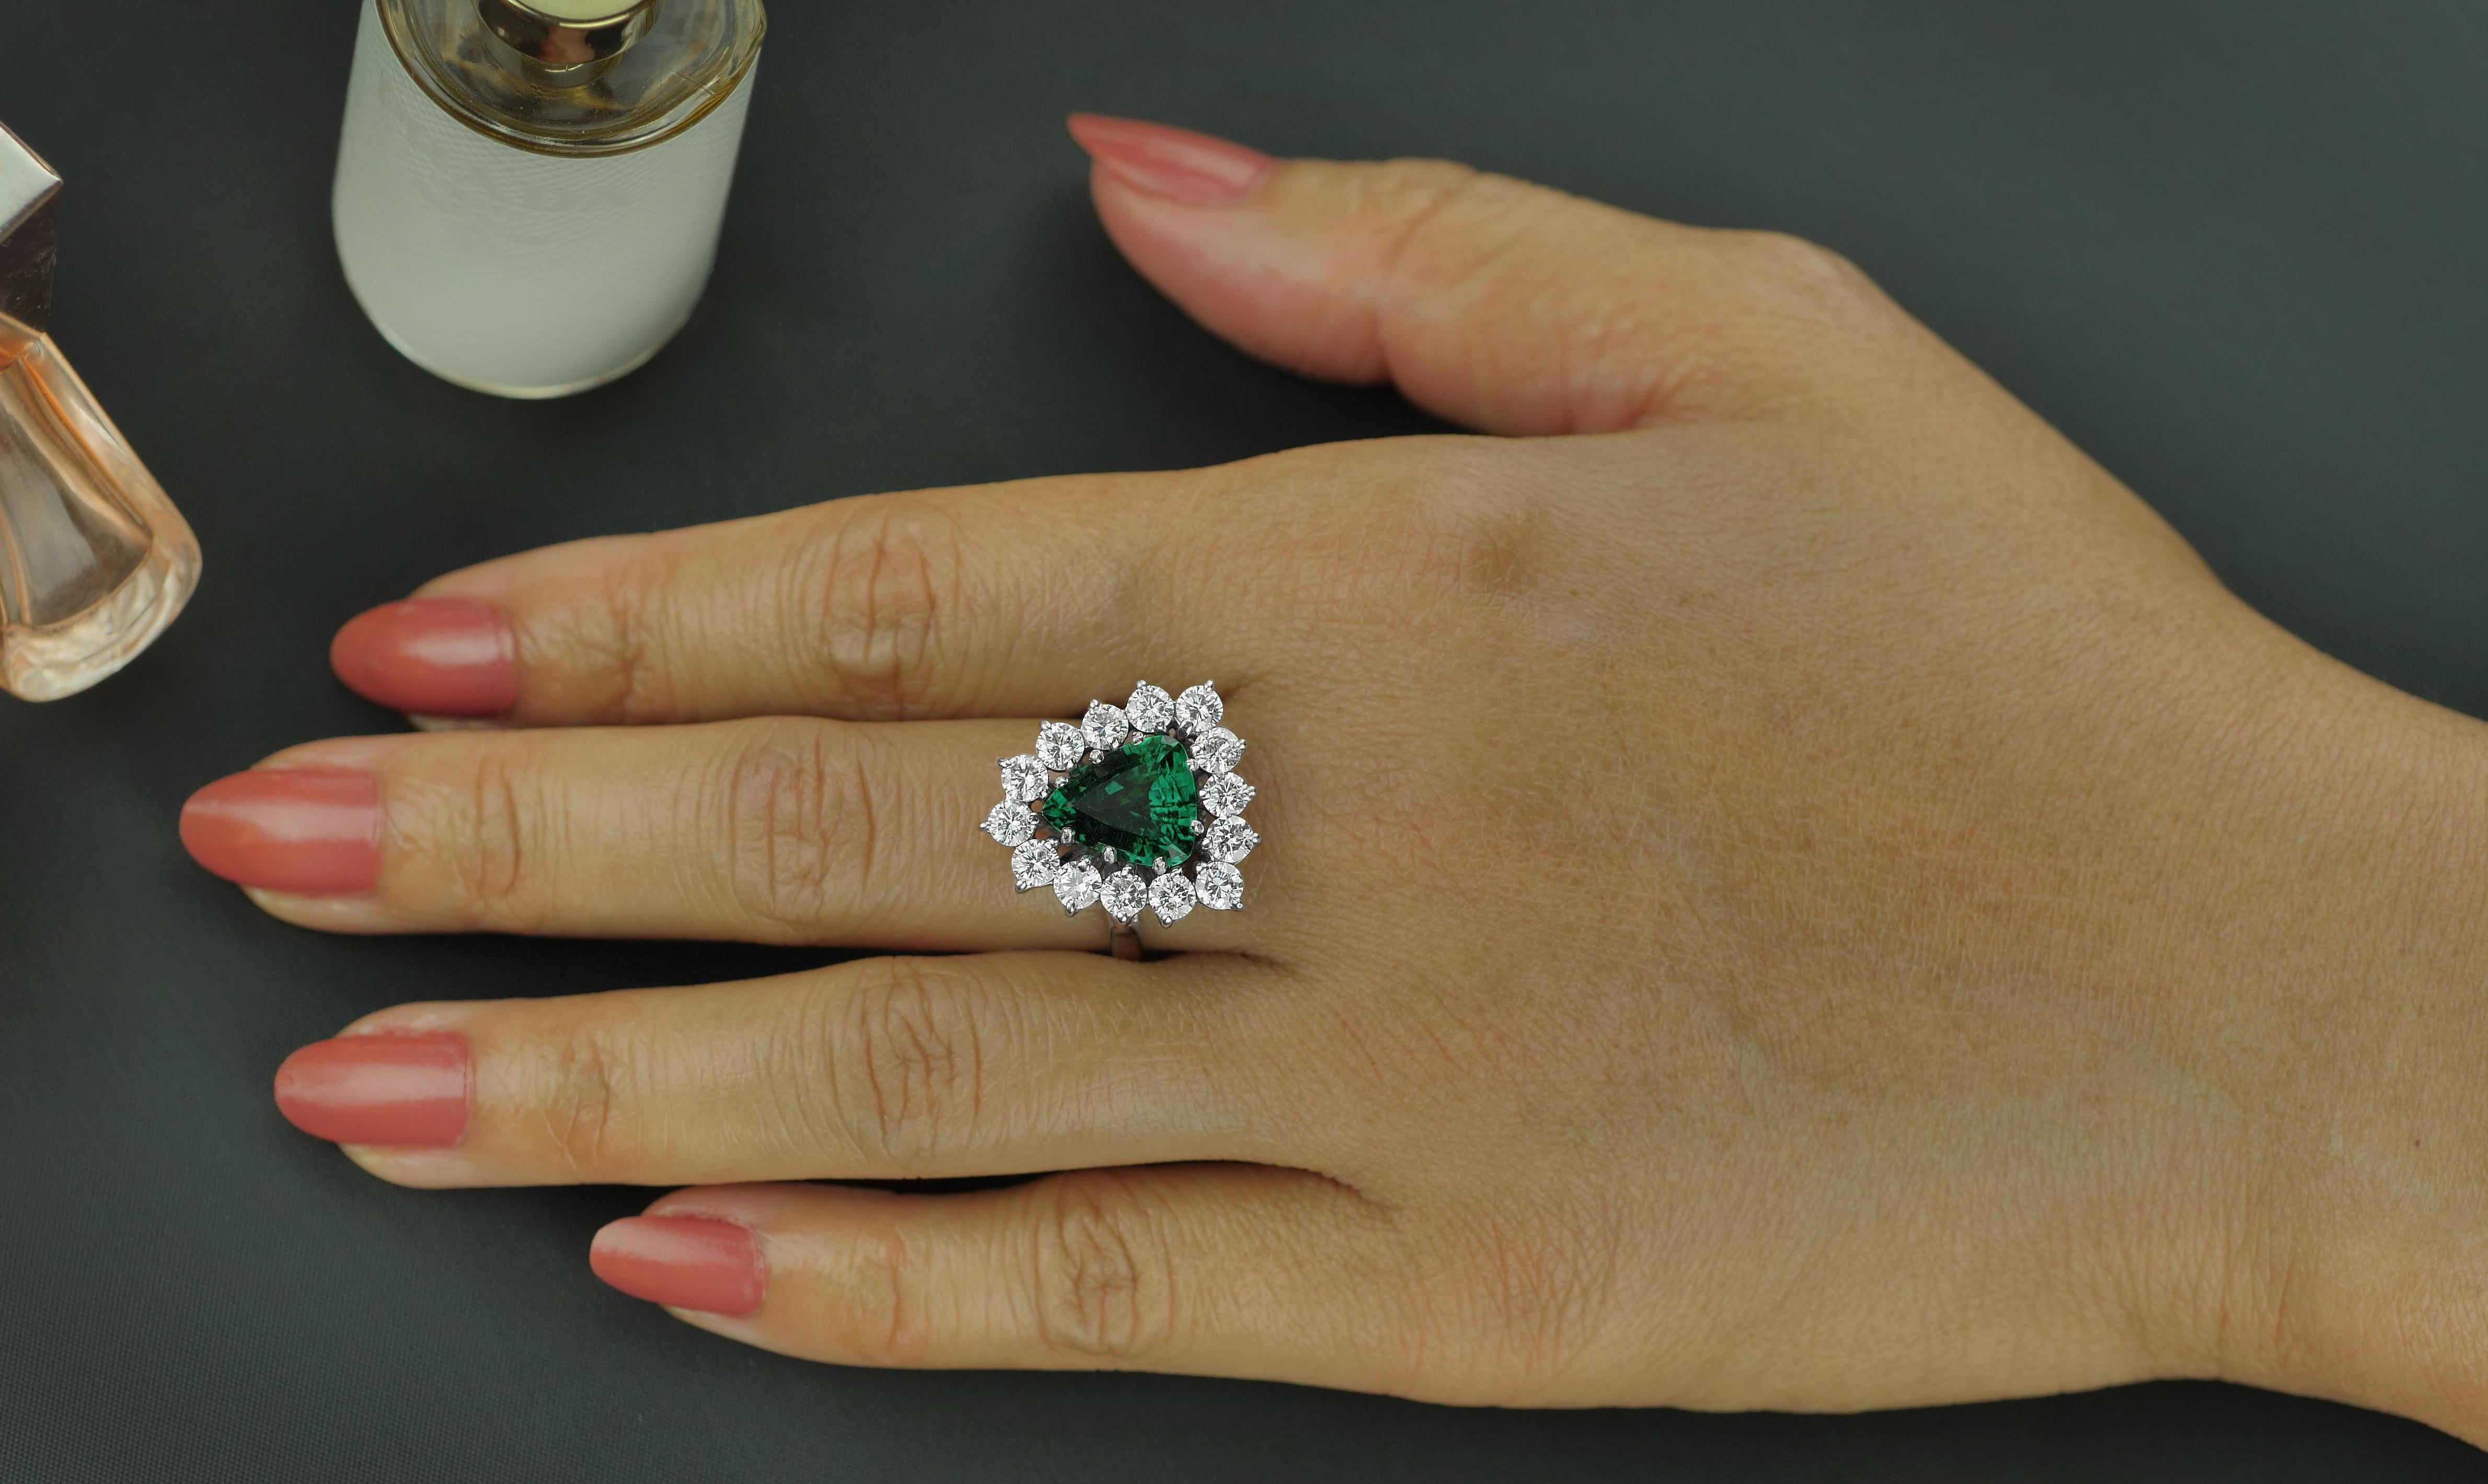 The remarkably clear depths of this 2.98 carat trilliant cut emerald cocktail ring is simply mesmerising. Its impressive proportions are complemented by round brilliant cut diamonds surrounding, meticulously set to focus the eye upon the hypnotic